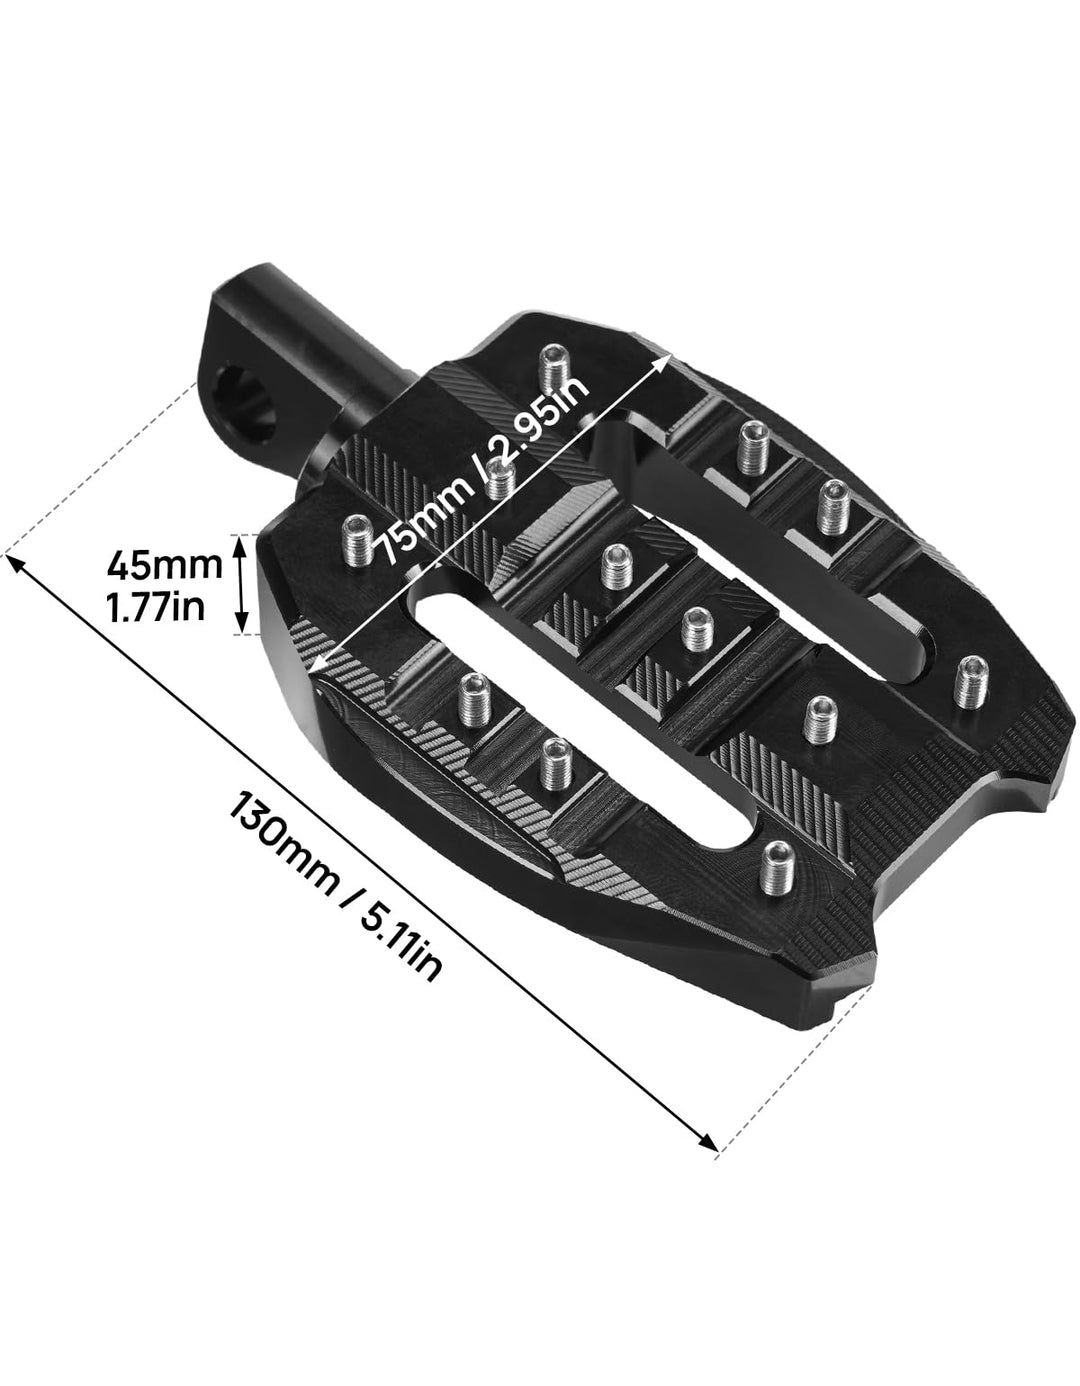 Motorcycle CNC Foot Rest for Sportster Iron 883 Dyna Softail FLFB FLSTF - Kemimoto